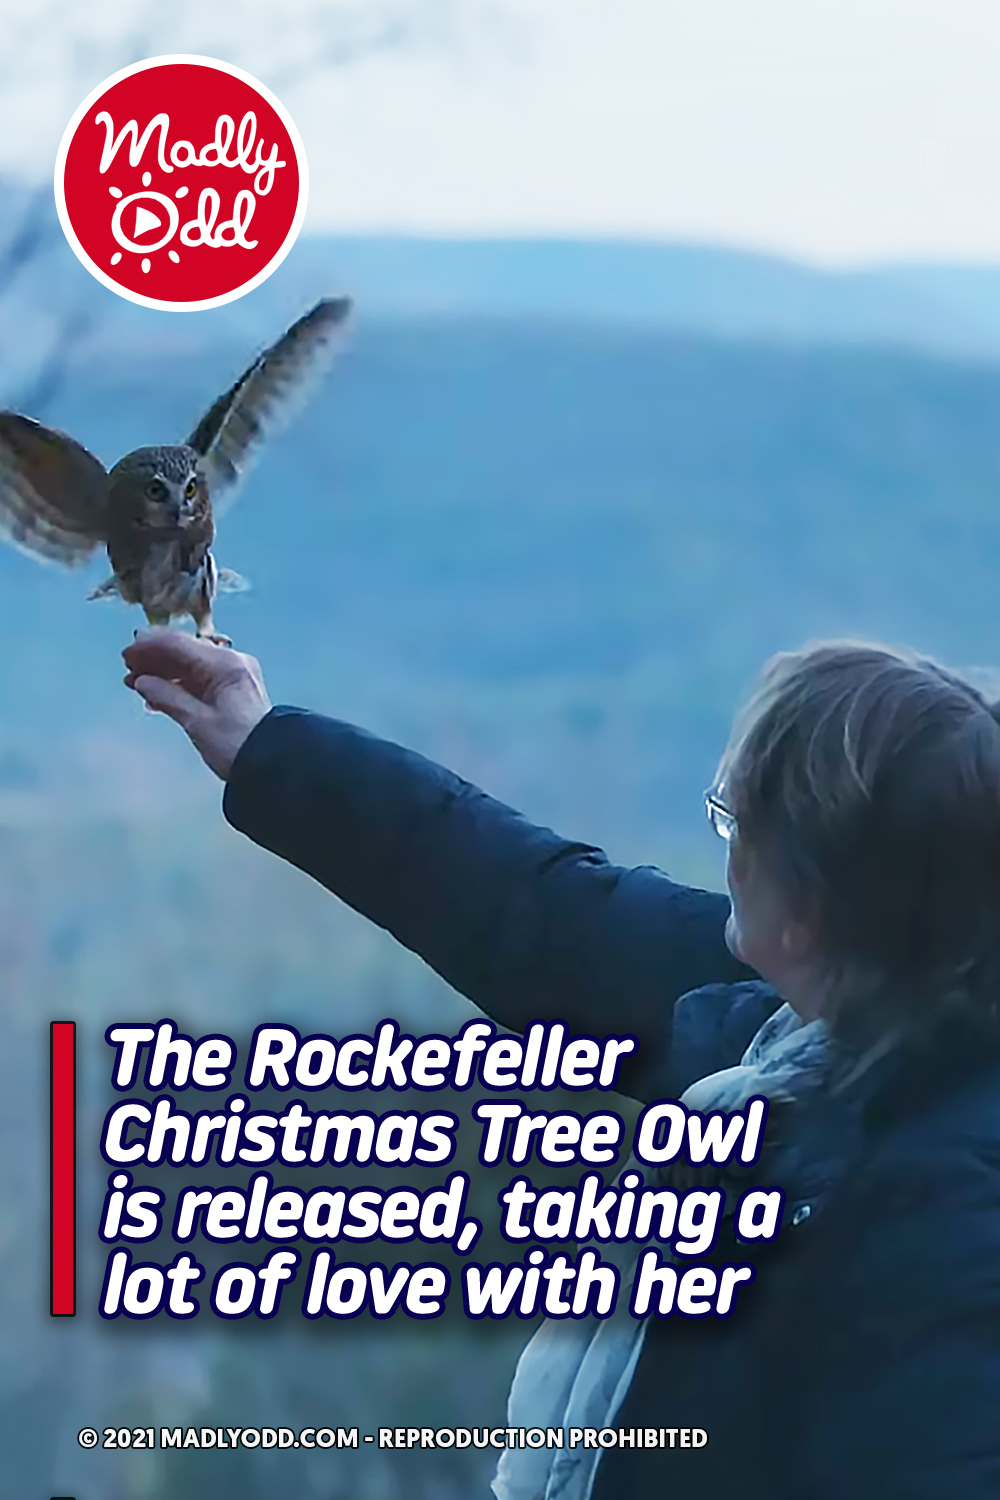 The Rockefeller Christmas Tree Owl is released, taking a lot of love with her